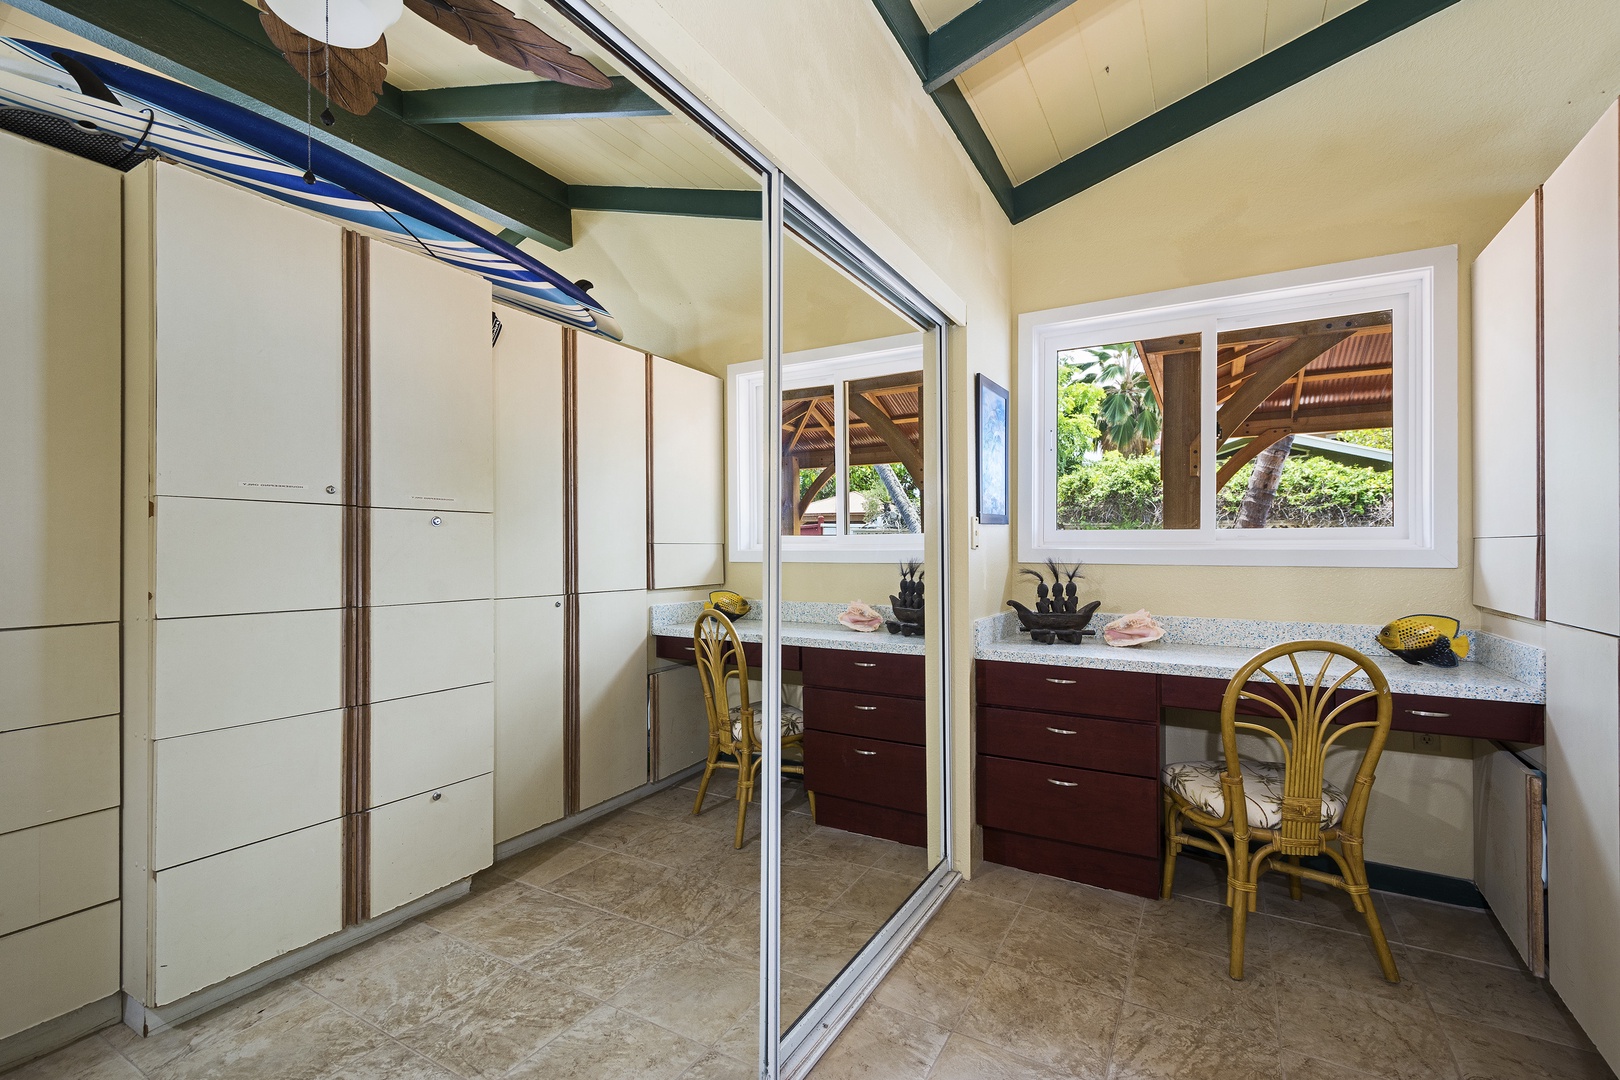 Kailua Kona Vacation Rentals, The Cottage - Small desk behind the bedroom for those that have to work of vacation